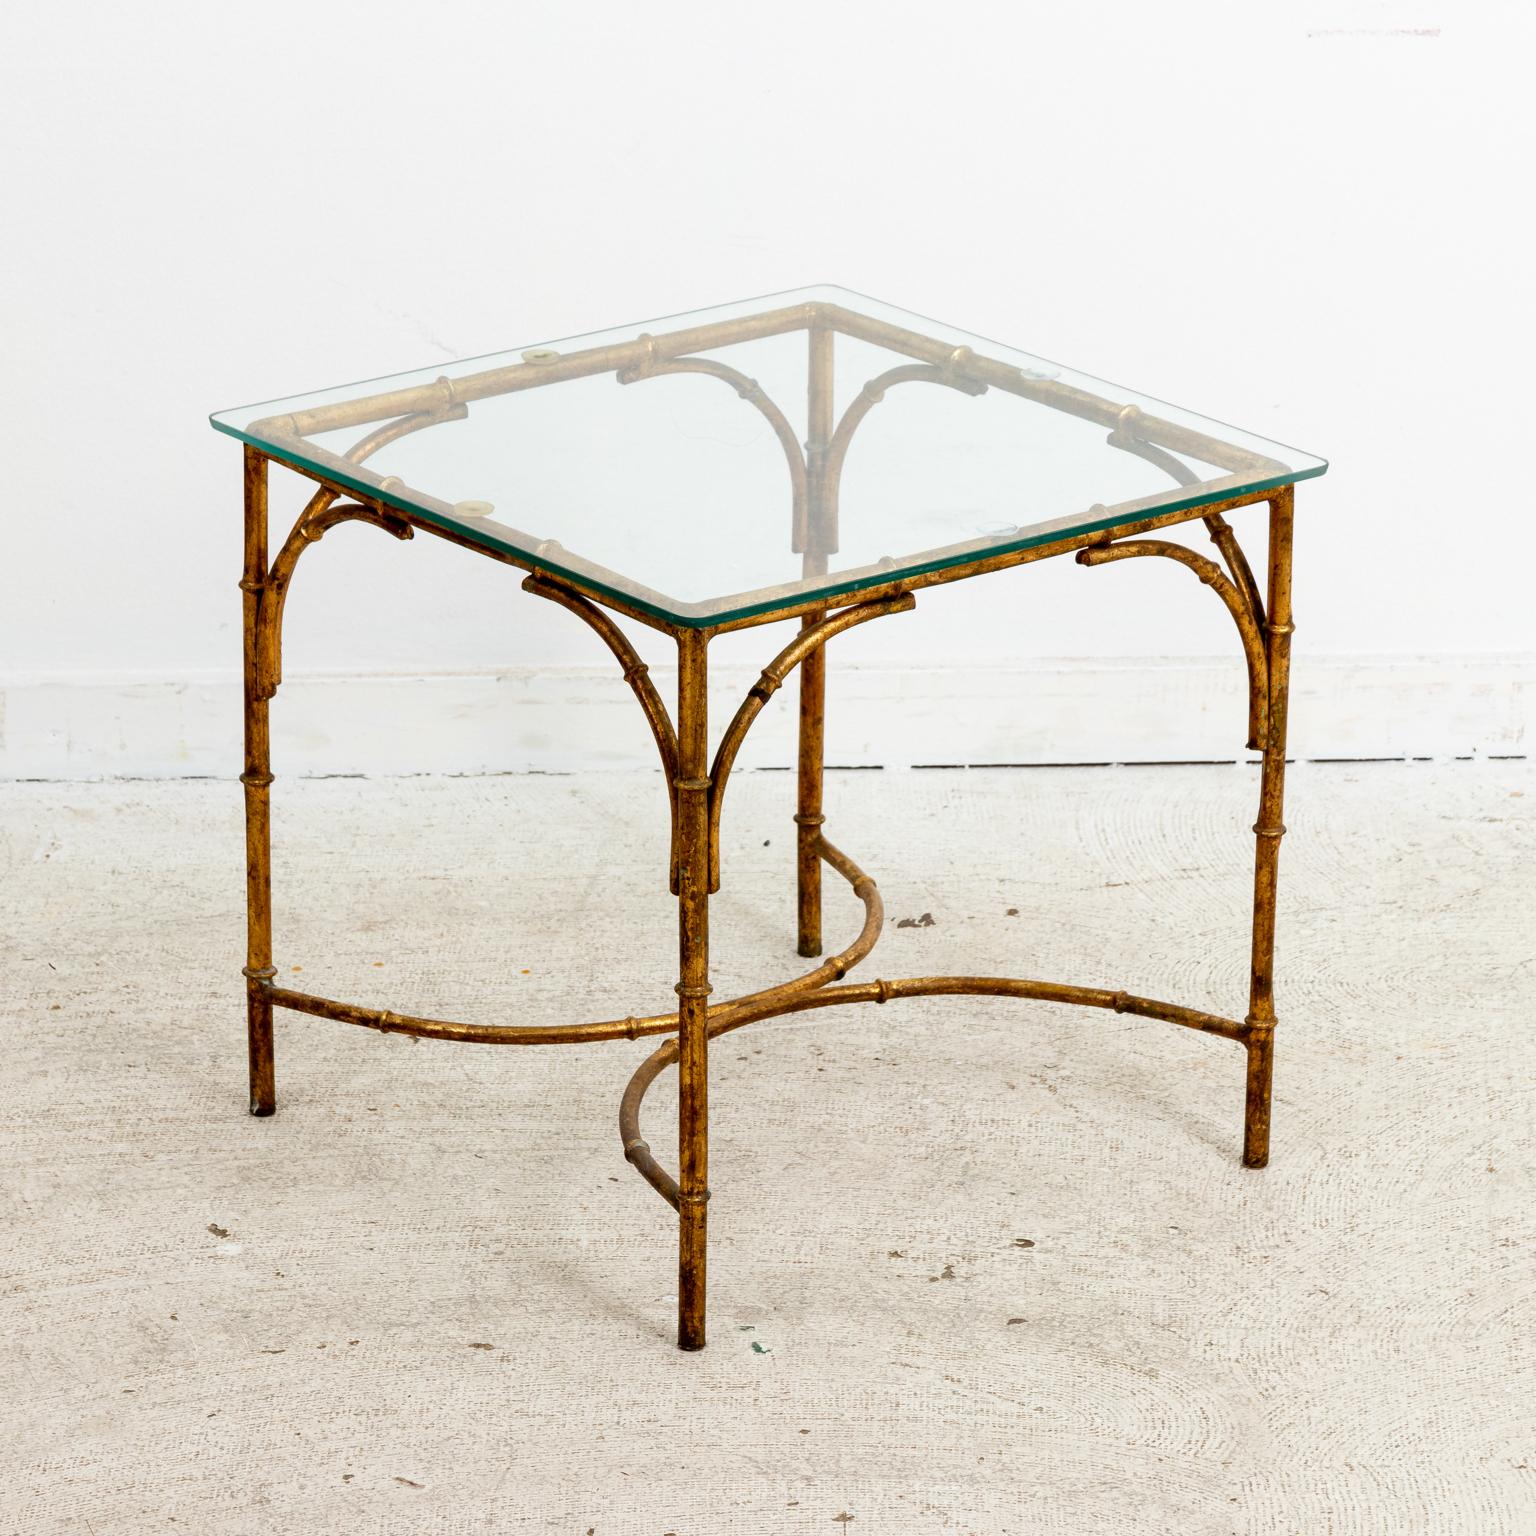 Circa 1960s set of three Hollywood Regency style low tables composed of a gilt metal frame with glass tabletops that can be used together as a coffee table or separately. Made in Italy. Please note of wear consistent with age including some old